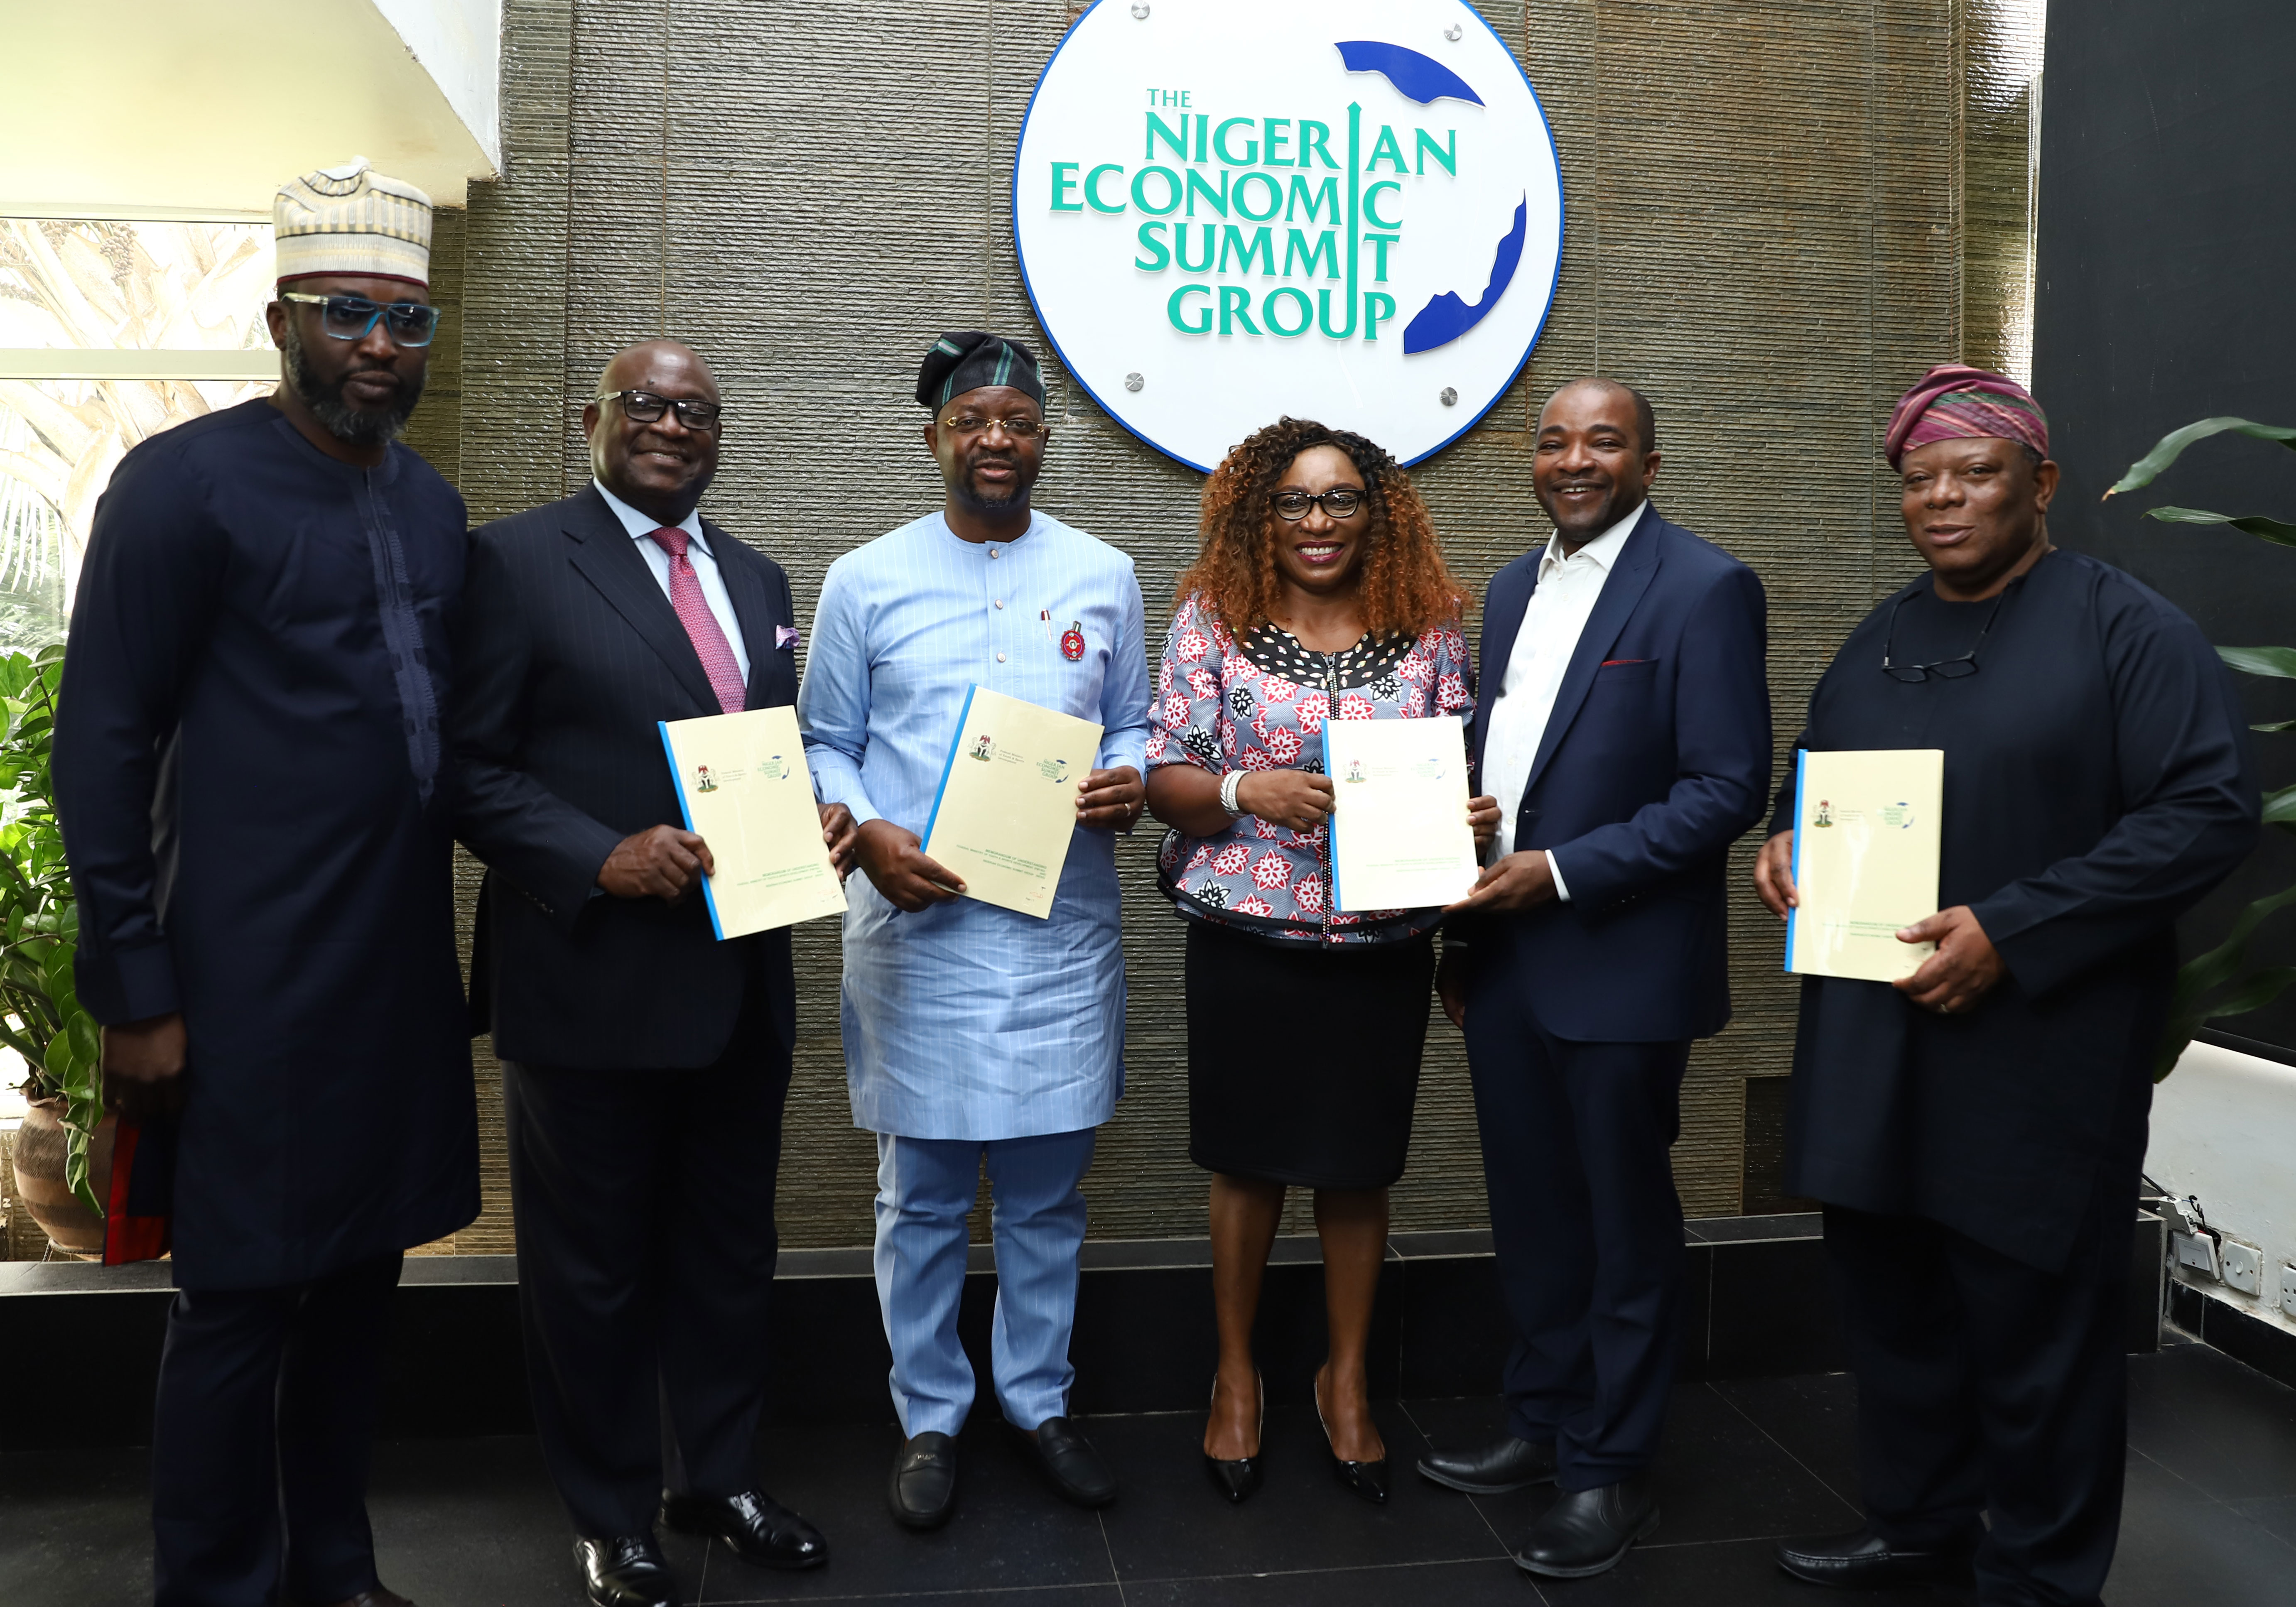 NESG and Federal Ministry of Youth and Sports Development Sign MoU on Sports industry development,The Nigerian Economic Summit Group, The NESG, think-tank, think, tank, nigeria, policy, nesg, africa, number one think in africa, best think in nigeria, the best think tank in africa, top 10 think tanks in nigeria, think tank nigeria, economy, business, PPD, public, private, dialogue, Nigeria, Nigeria PPD, NIGERIA, PPD, The Nigerian Economic Summit Group